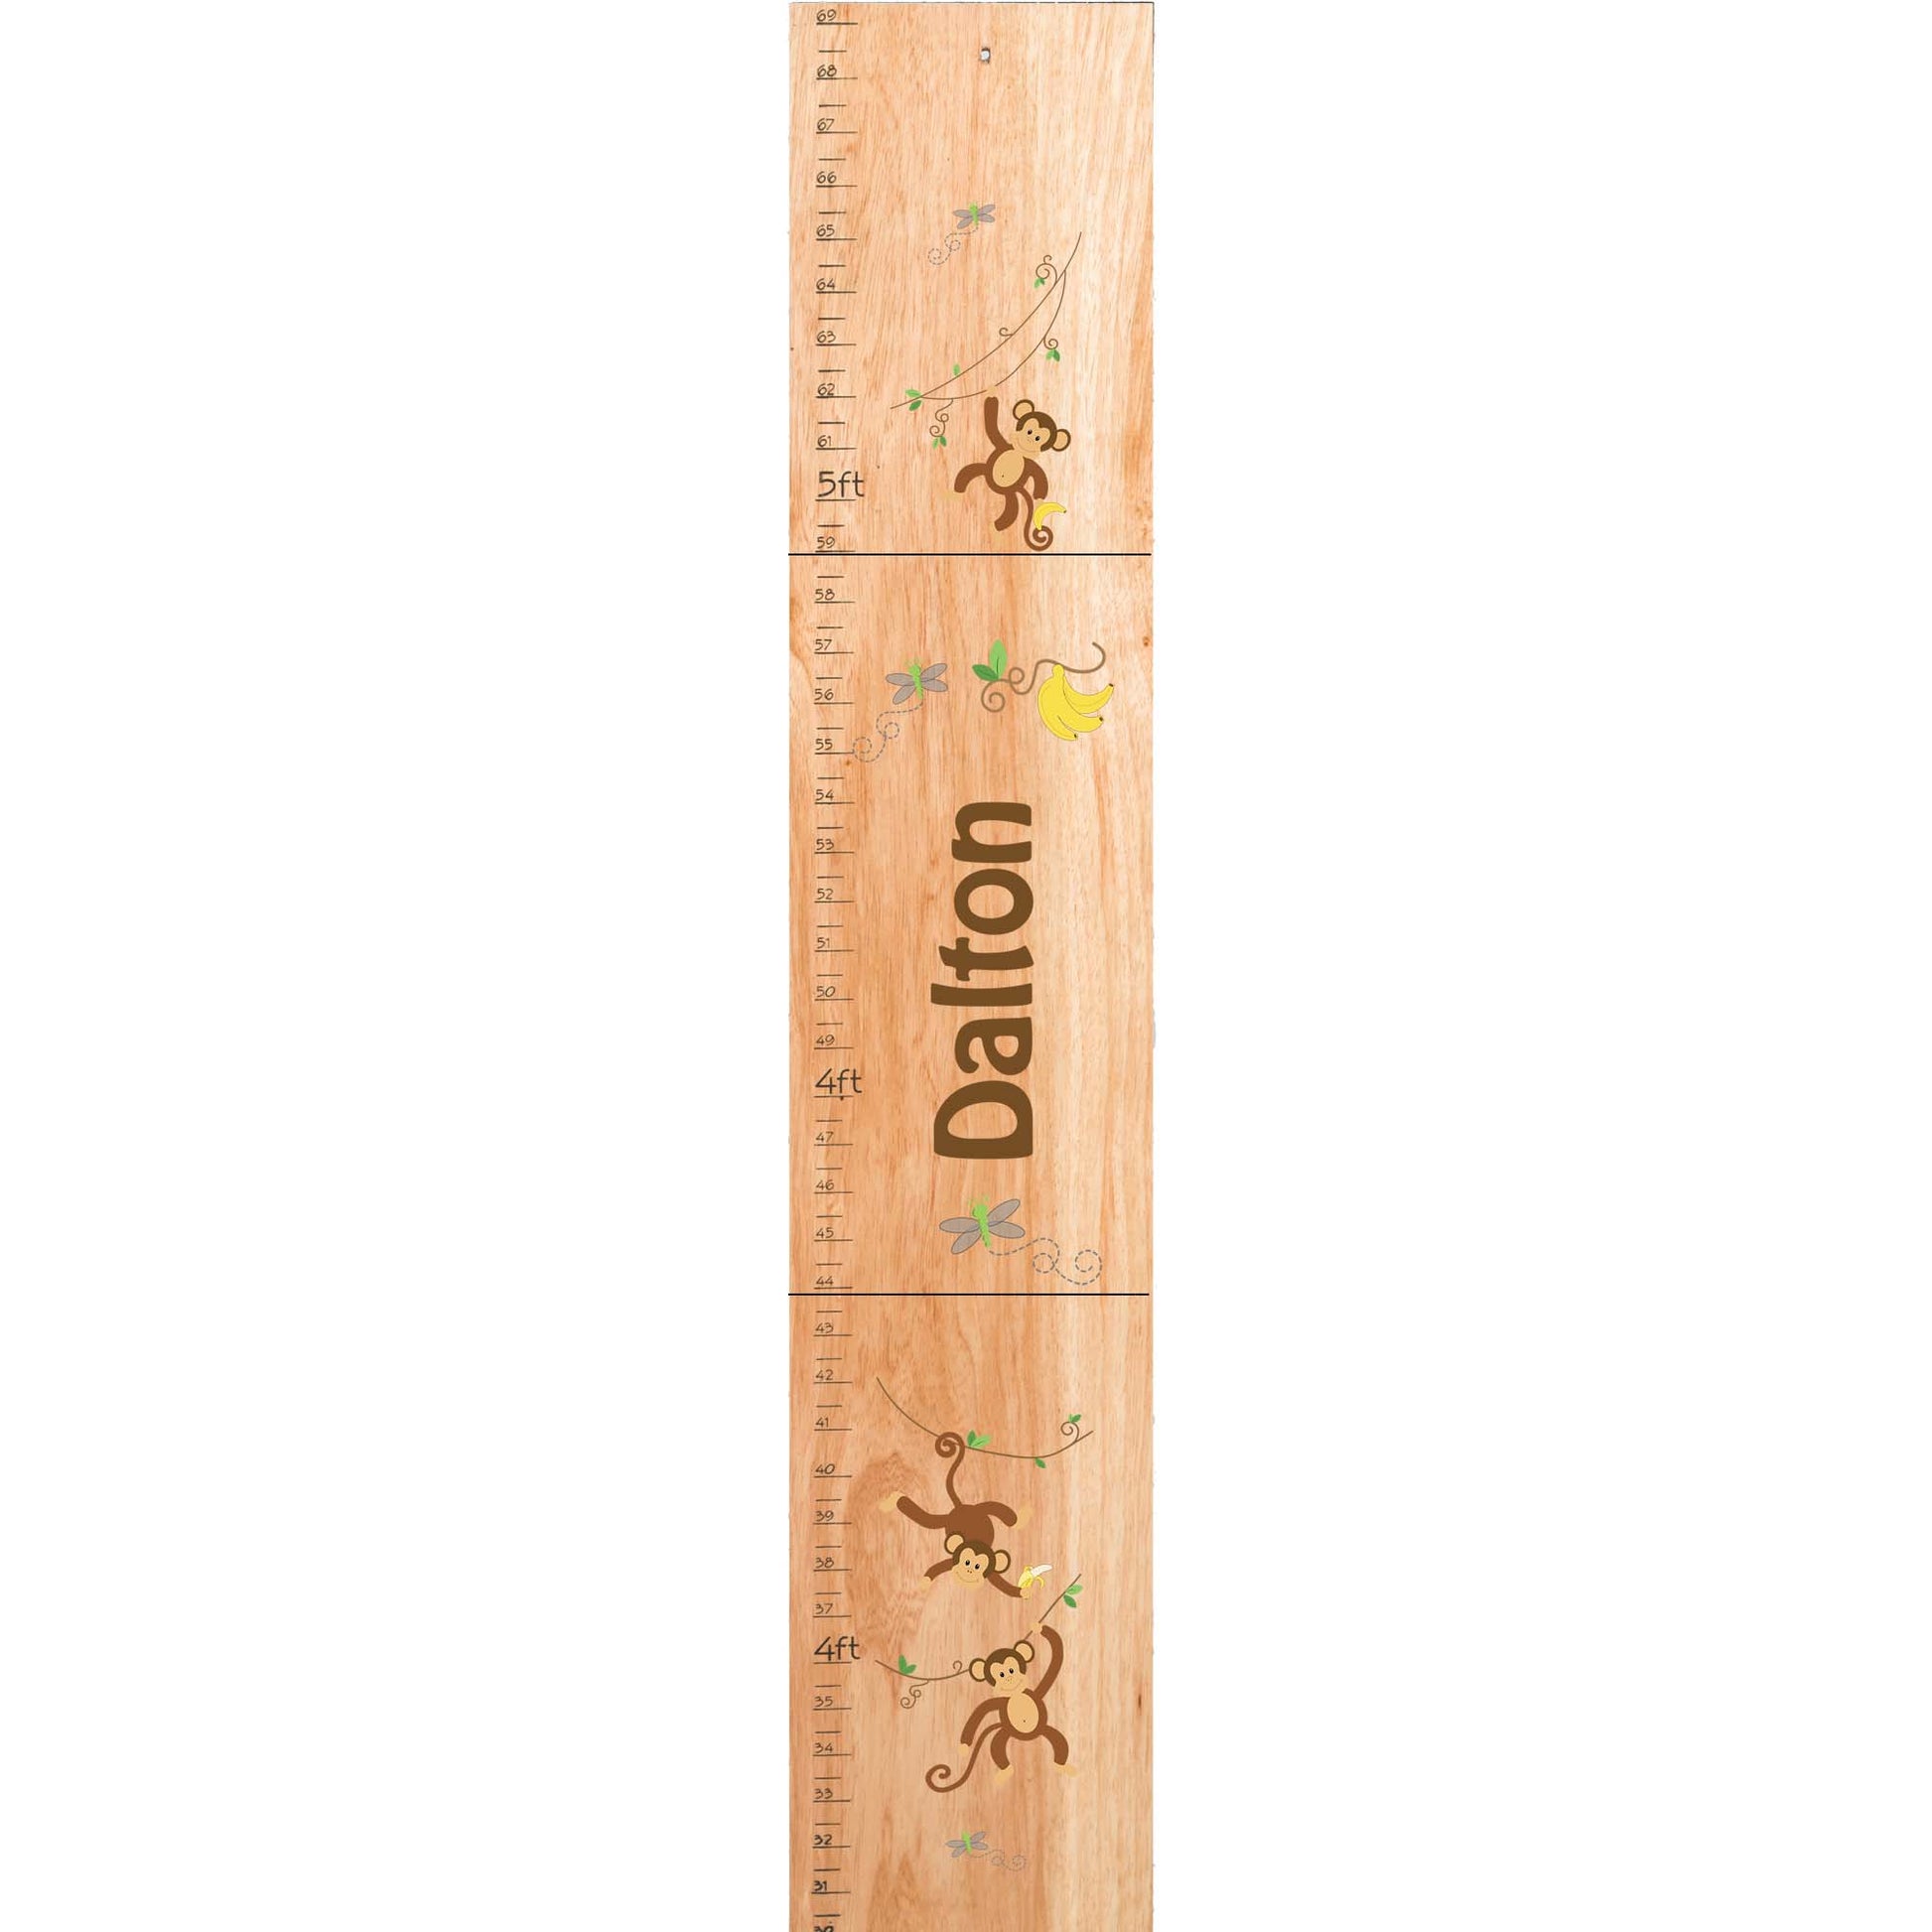 Personalized Natural Growth Chart With Monkey Boy Design